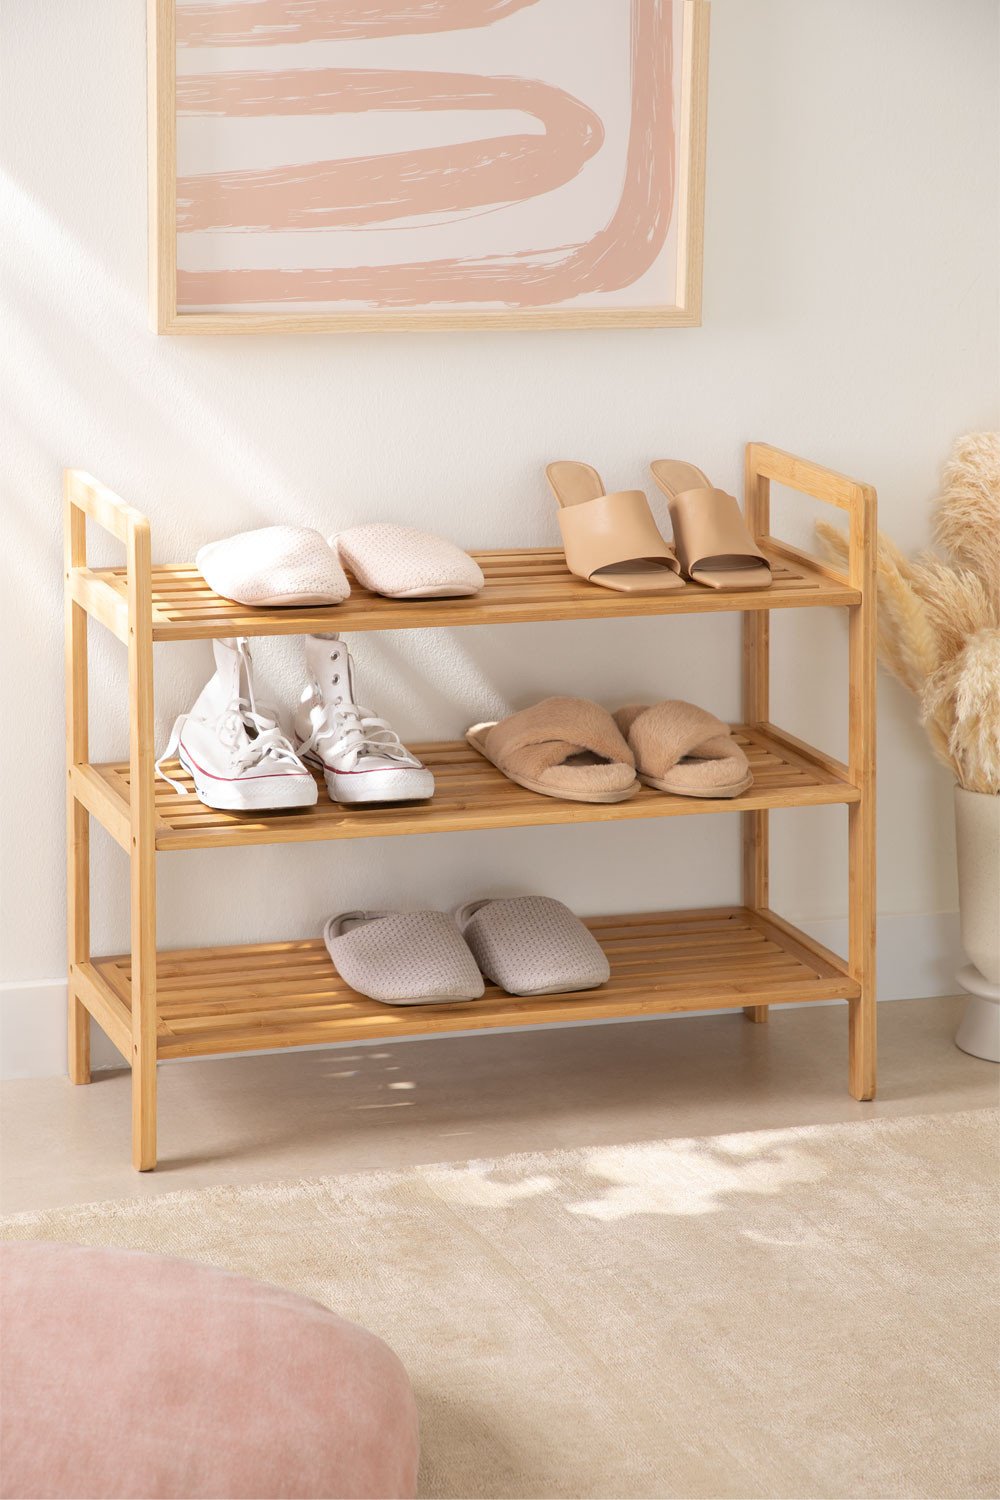 Rustic Wooden Shoe Rack - Southampton Wood Recycling Project